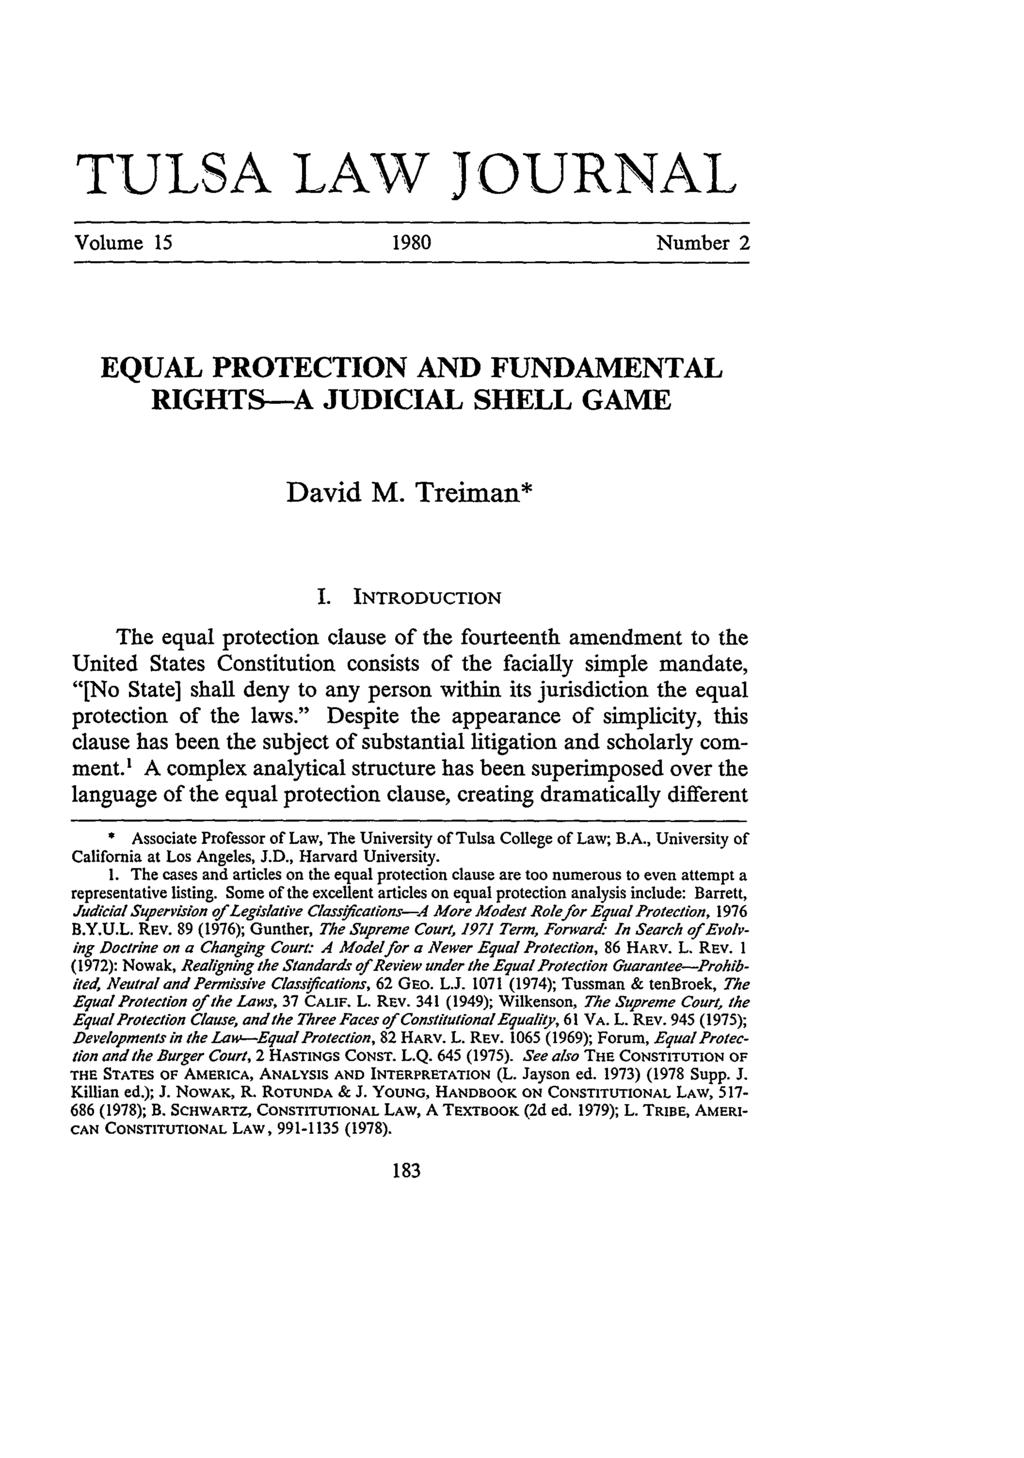 Treiman: Equal Protection and Fundamental Rights--A Judicial Shell Game TULSA LAW JOURNAL Volume 15 1980 Number 2 EQUAL PROTECTION AND FUNDAMENTAL RIGHTS-A JUDICIAL SHELL GAME David M. Treiman* I.